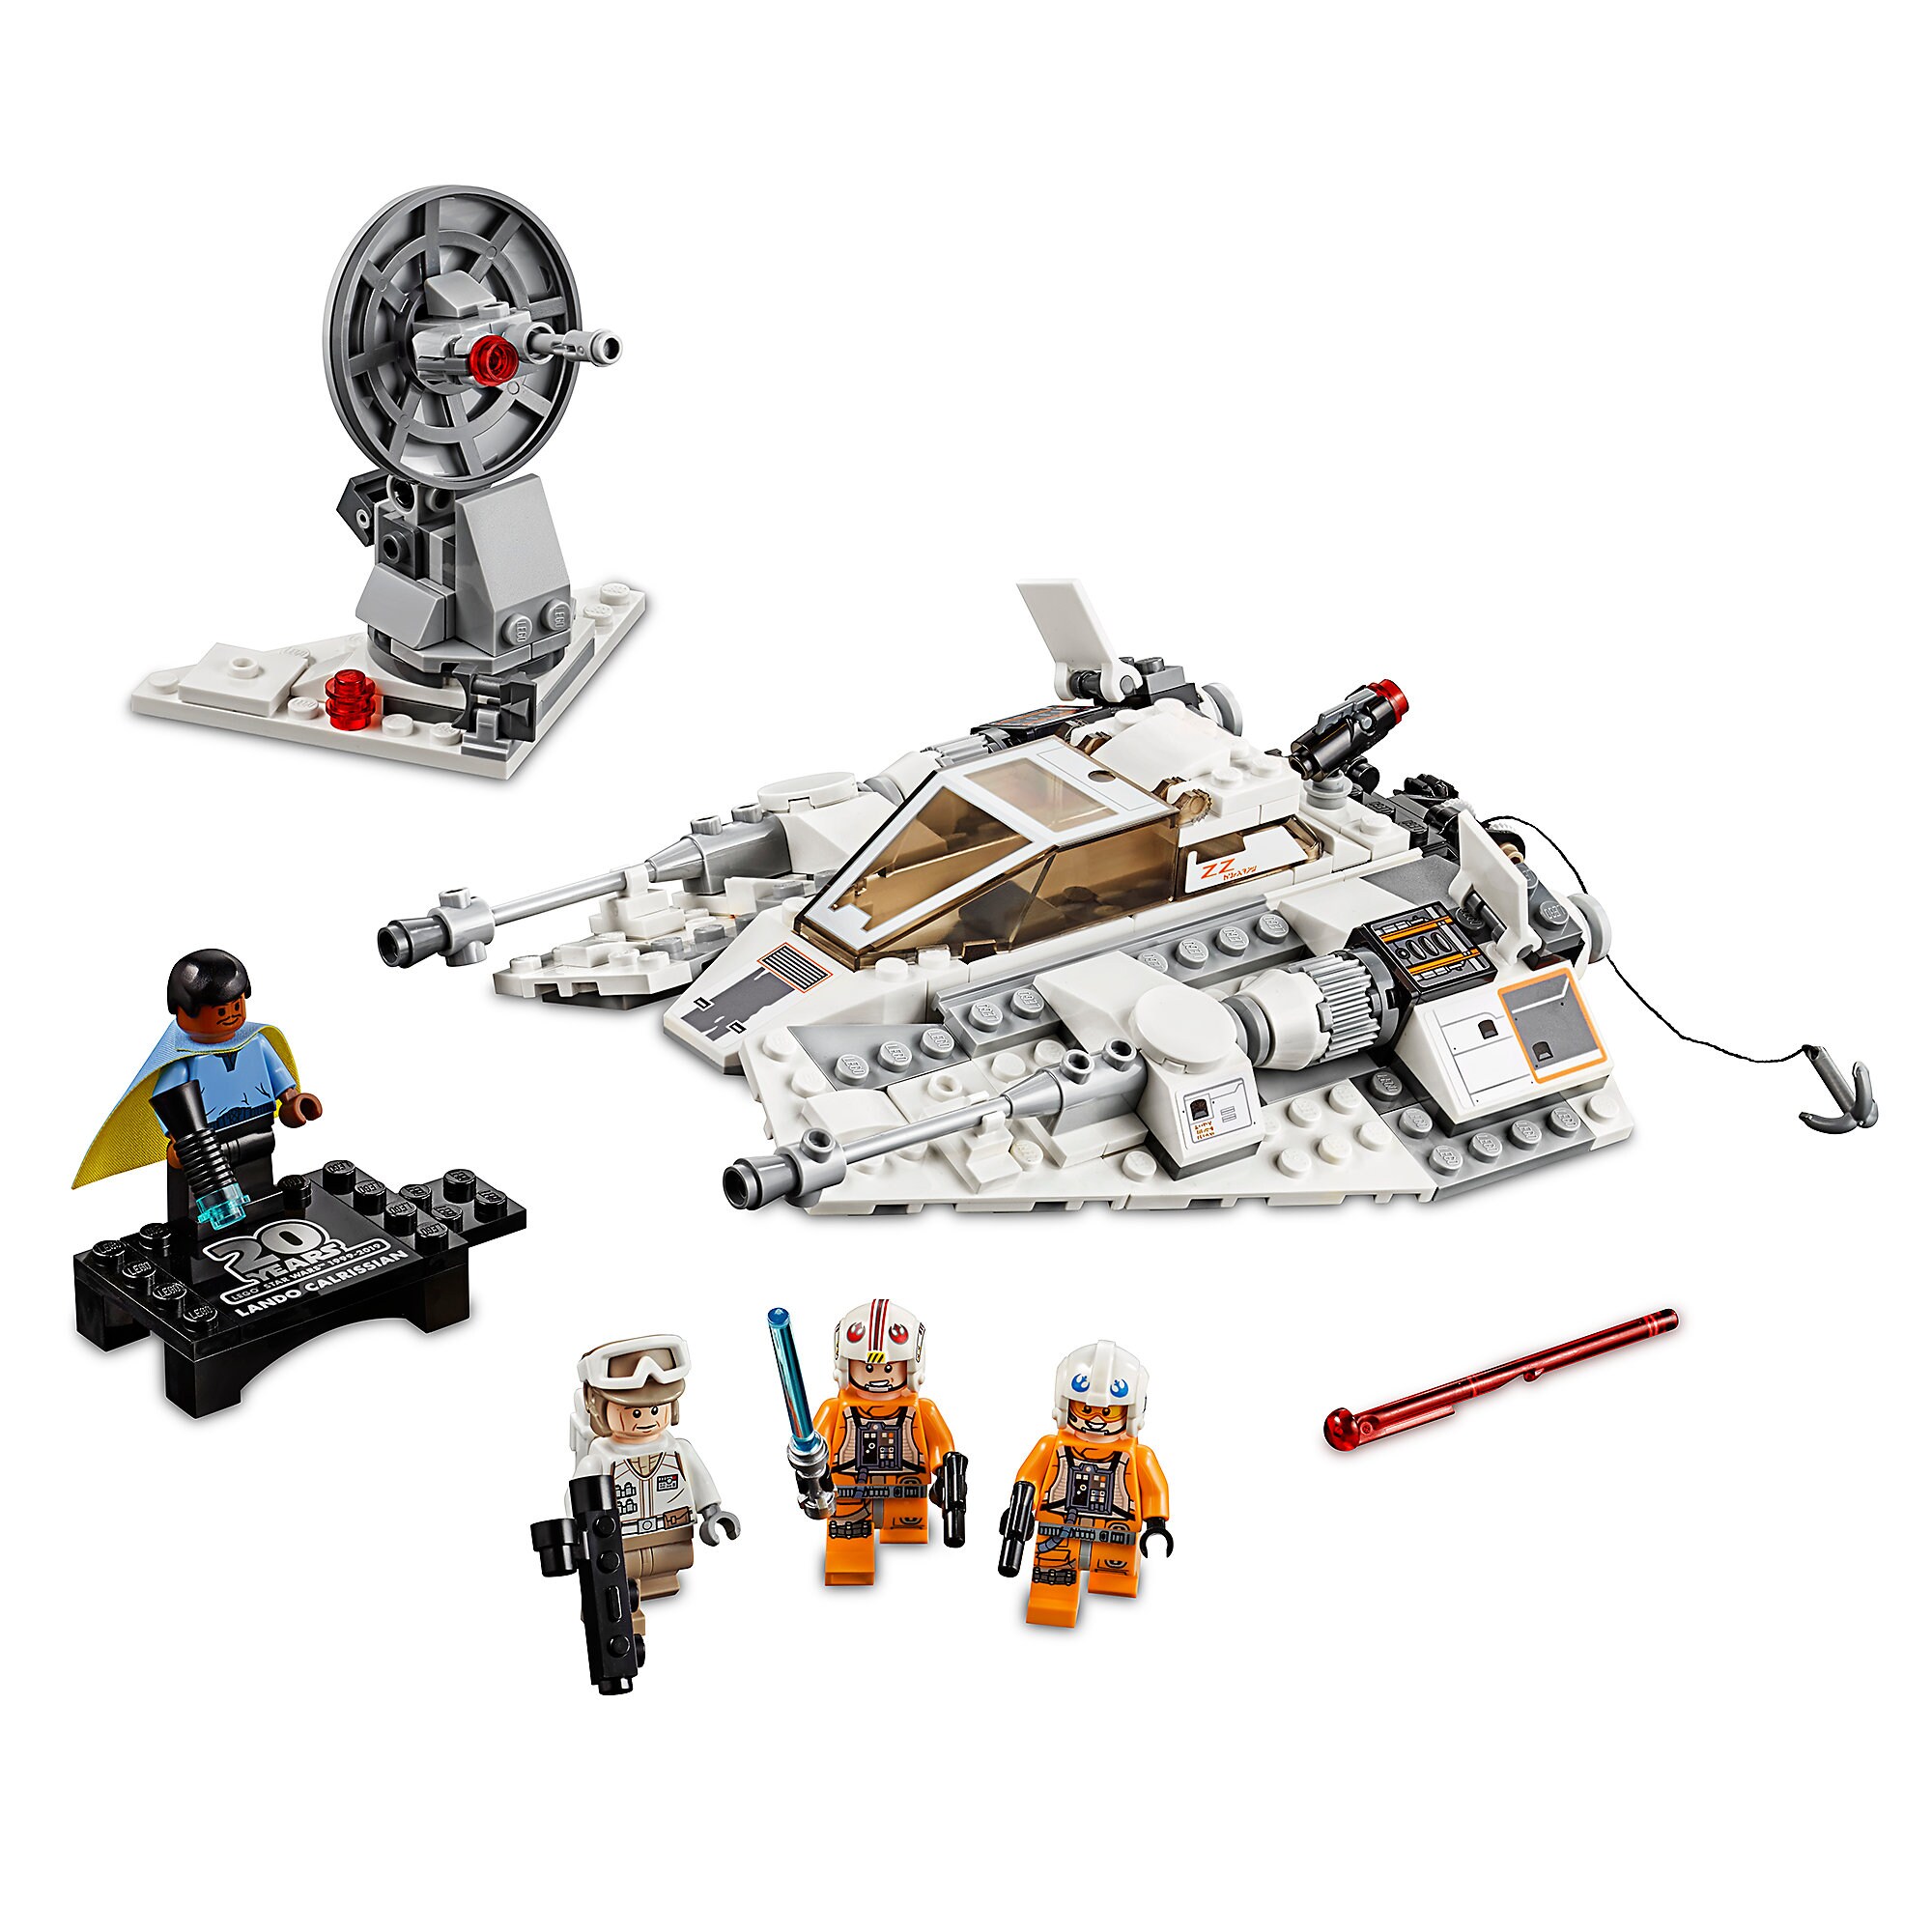 Snowspeeder - 20th Anniversary Edition Play Set by LEGO - Star Wars: The Empire Strikes Back